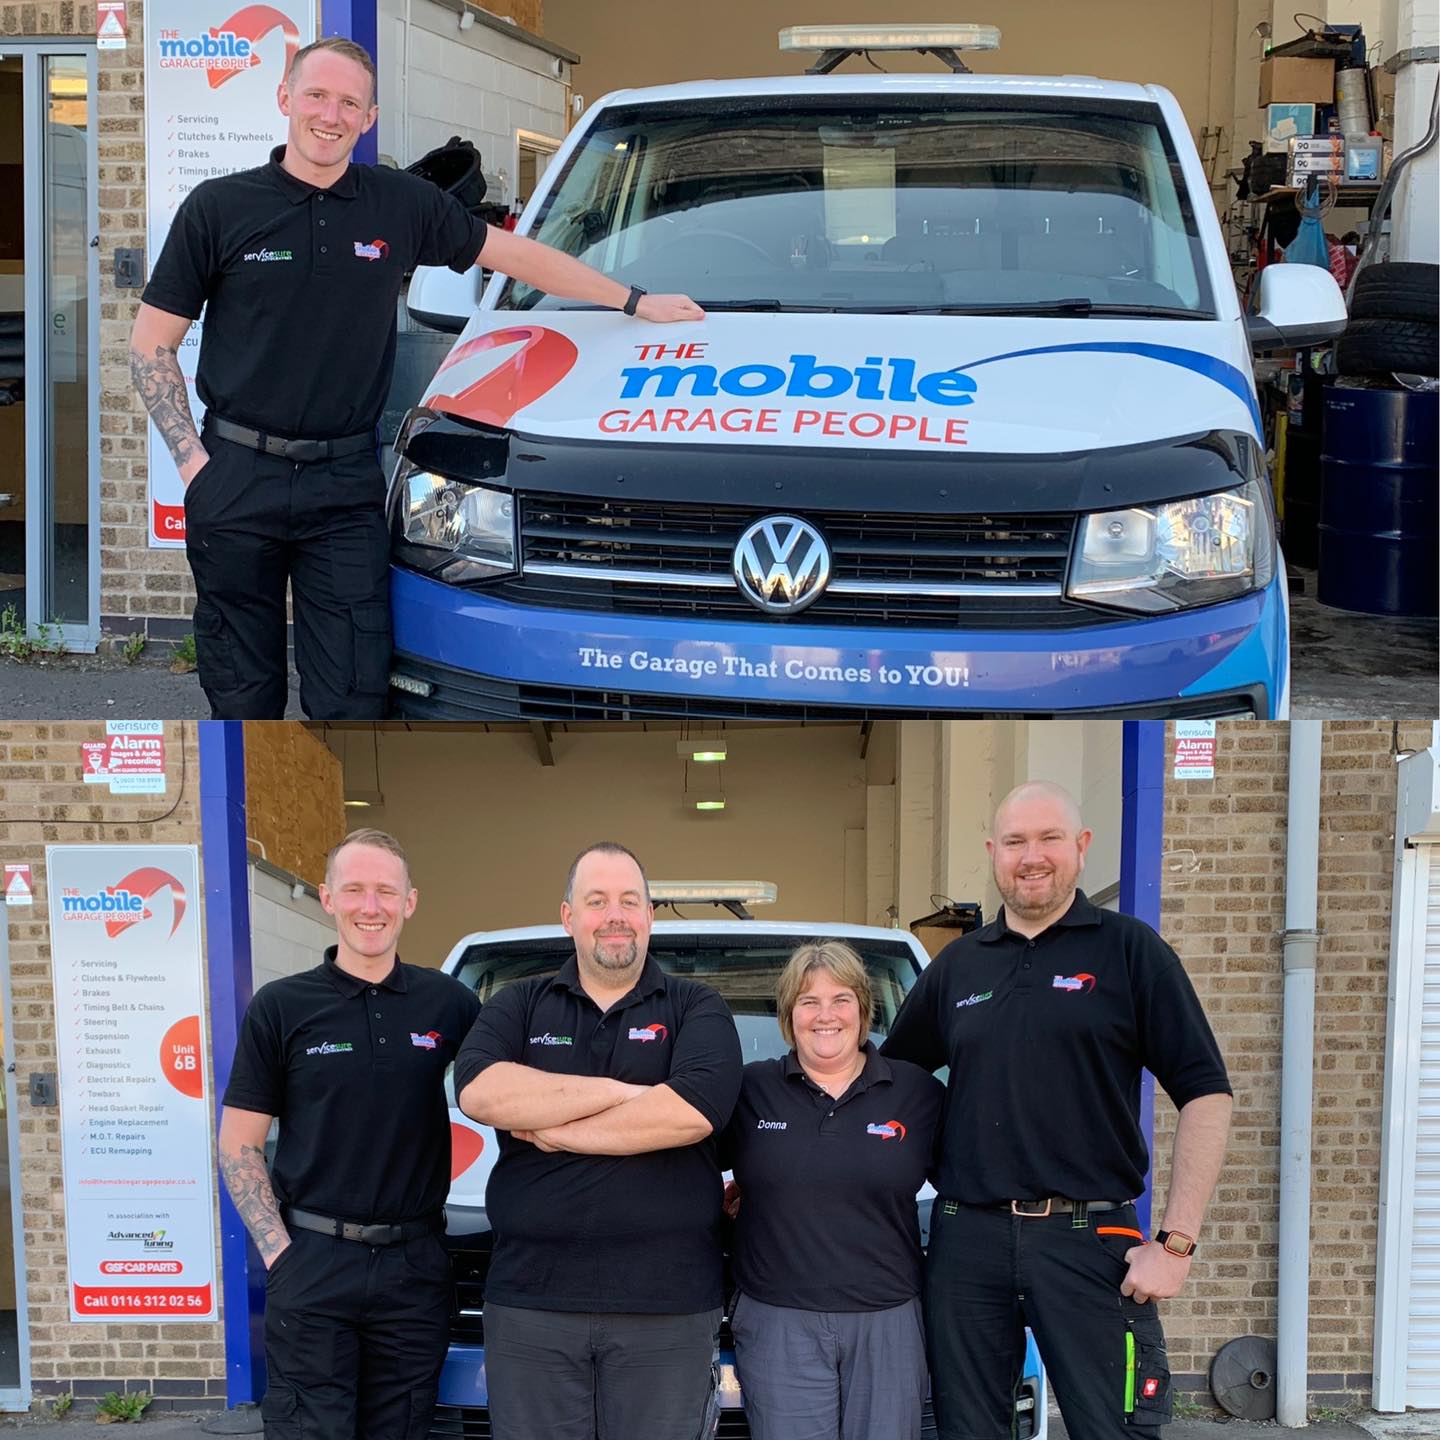 The Mobile Garage People Leicester 01162 166585